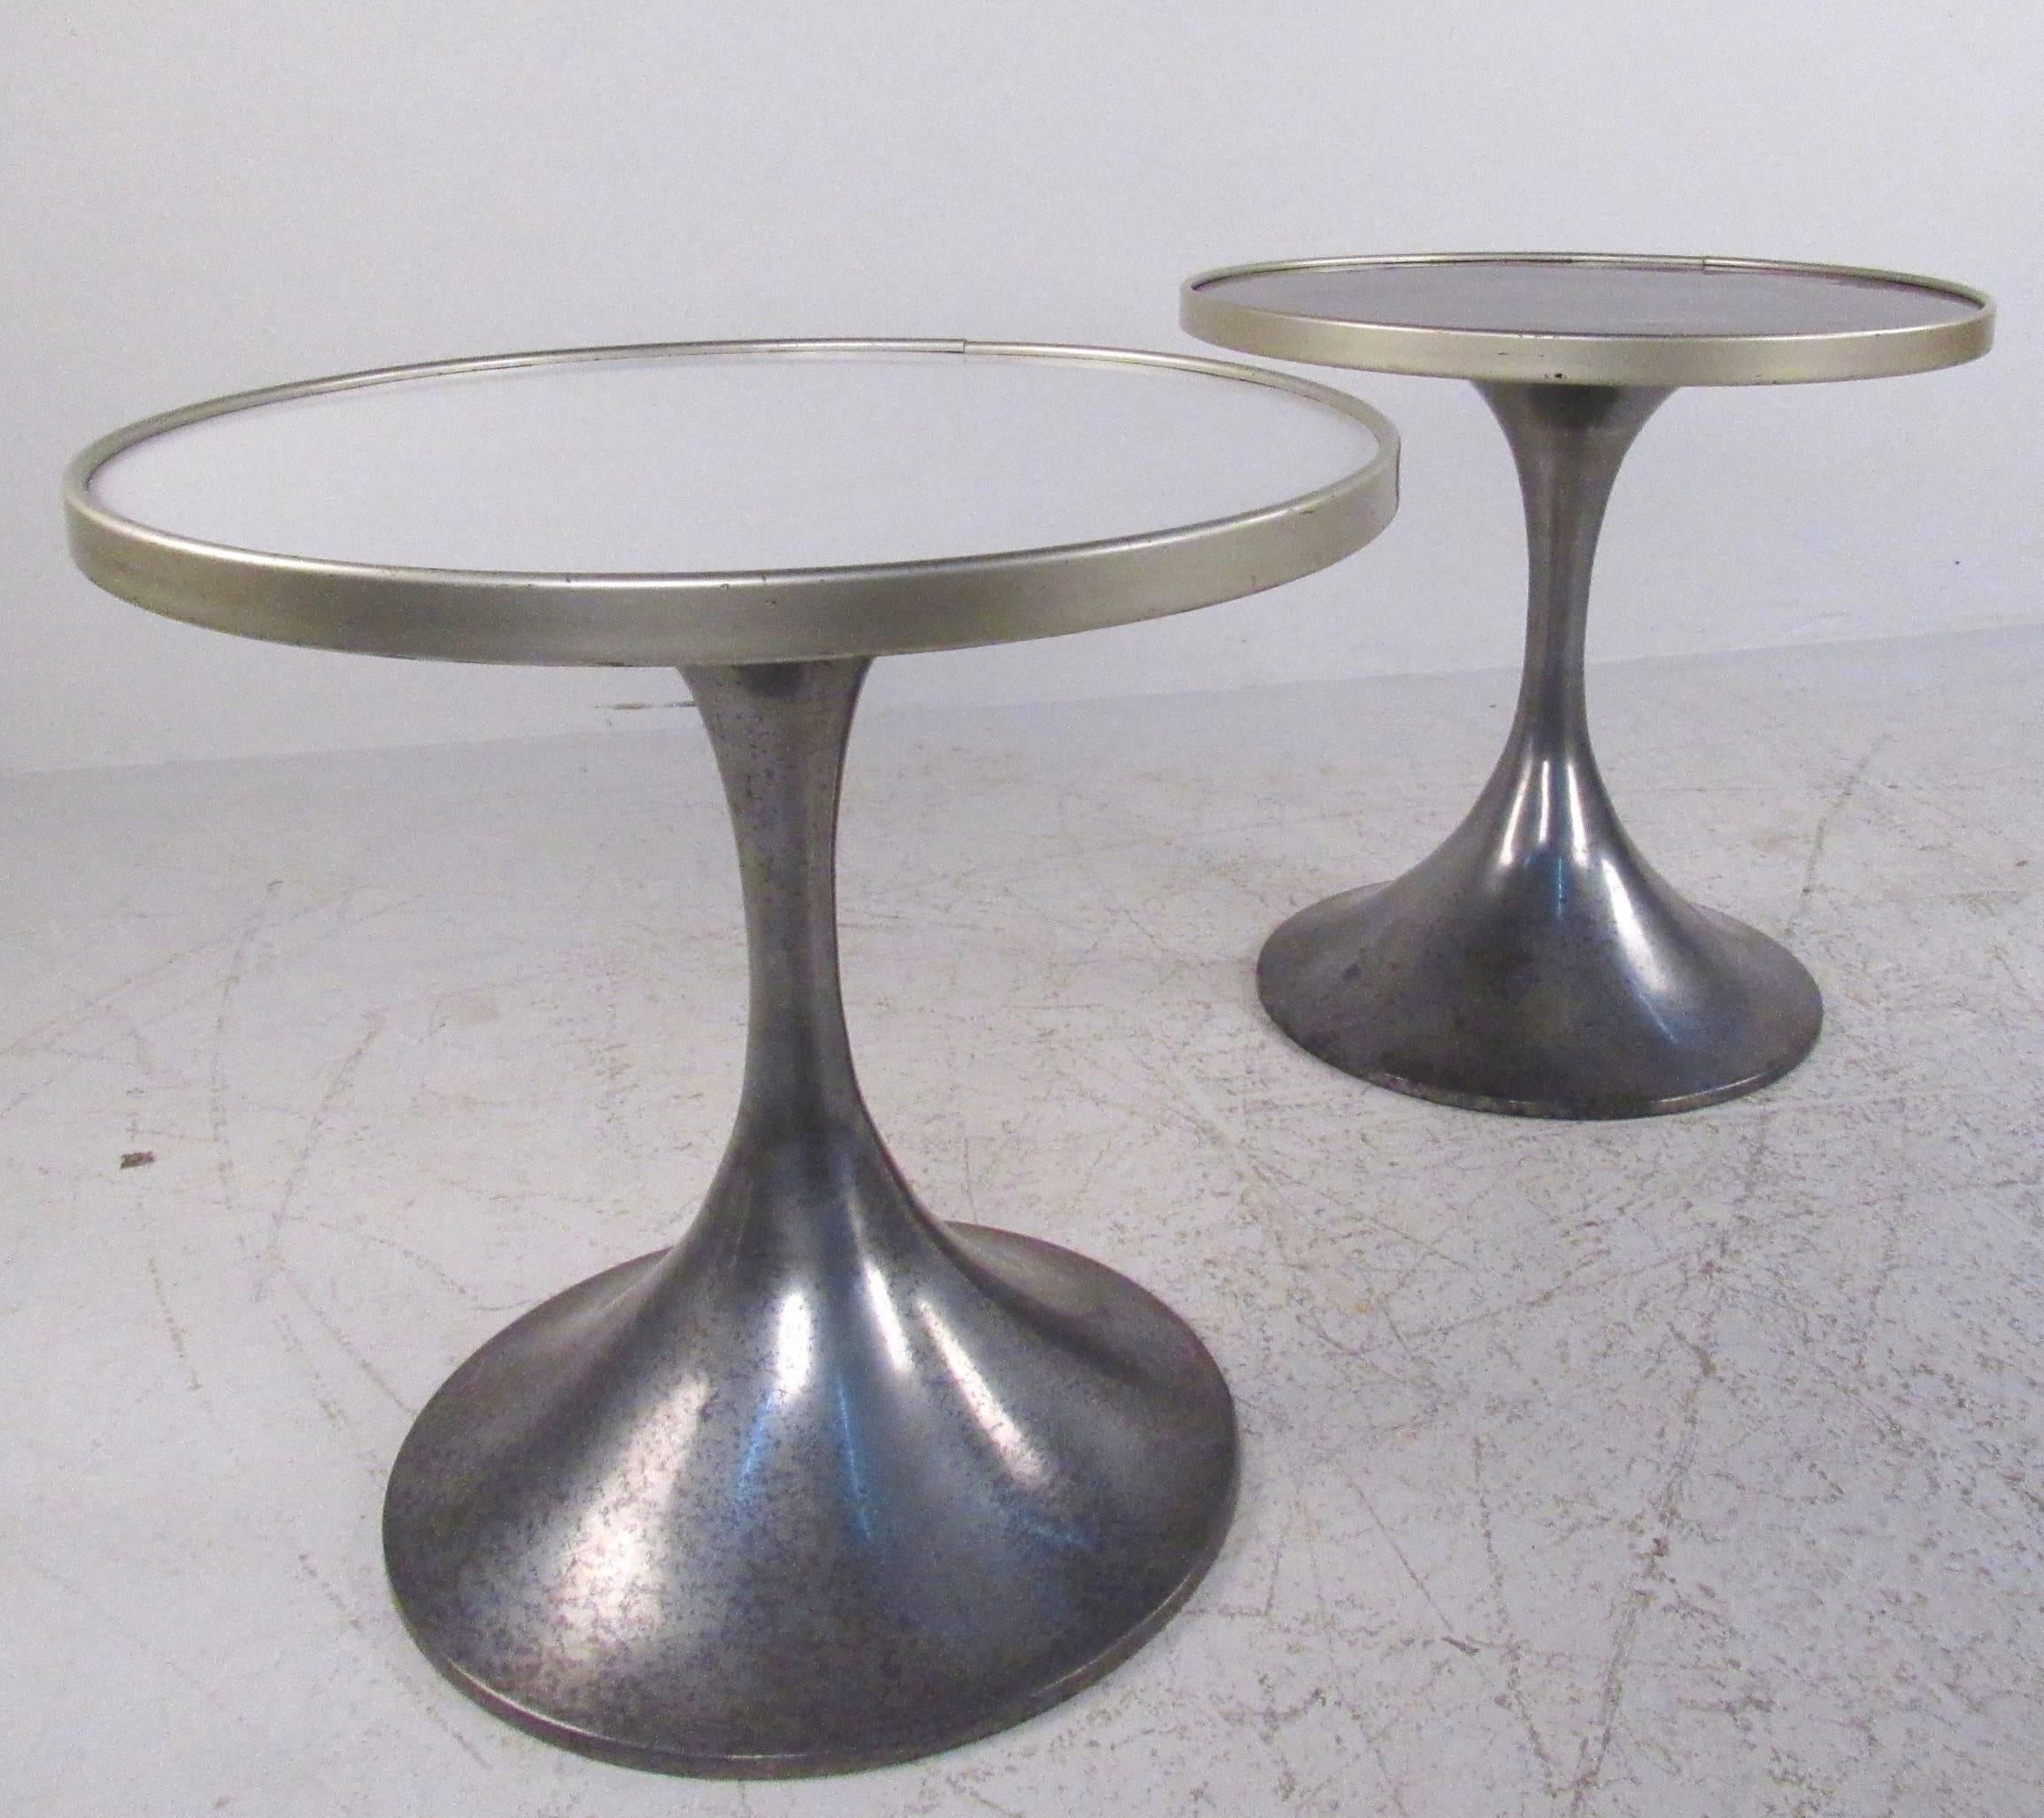 This unique Mid-Century pair features sleek metal pedestals with laminate tops. In complimentary natural wood and white finishes this matching pair of German-made tables echo the style of Eero Saarinen and other Mid-Century Modern icons. These